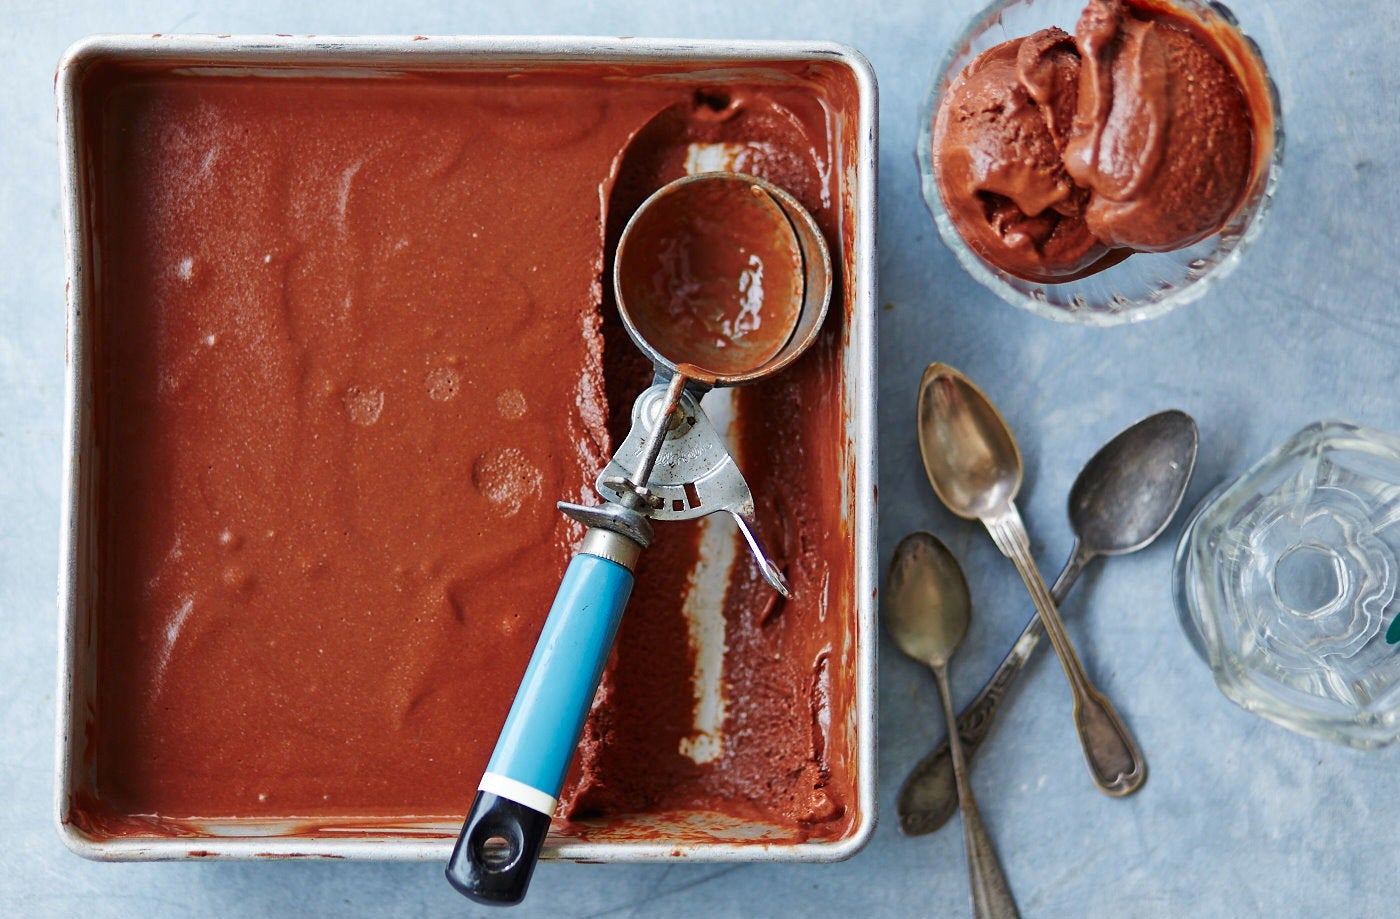 Rich and creamy, you can’t go wrong with chocolate